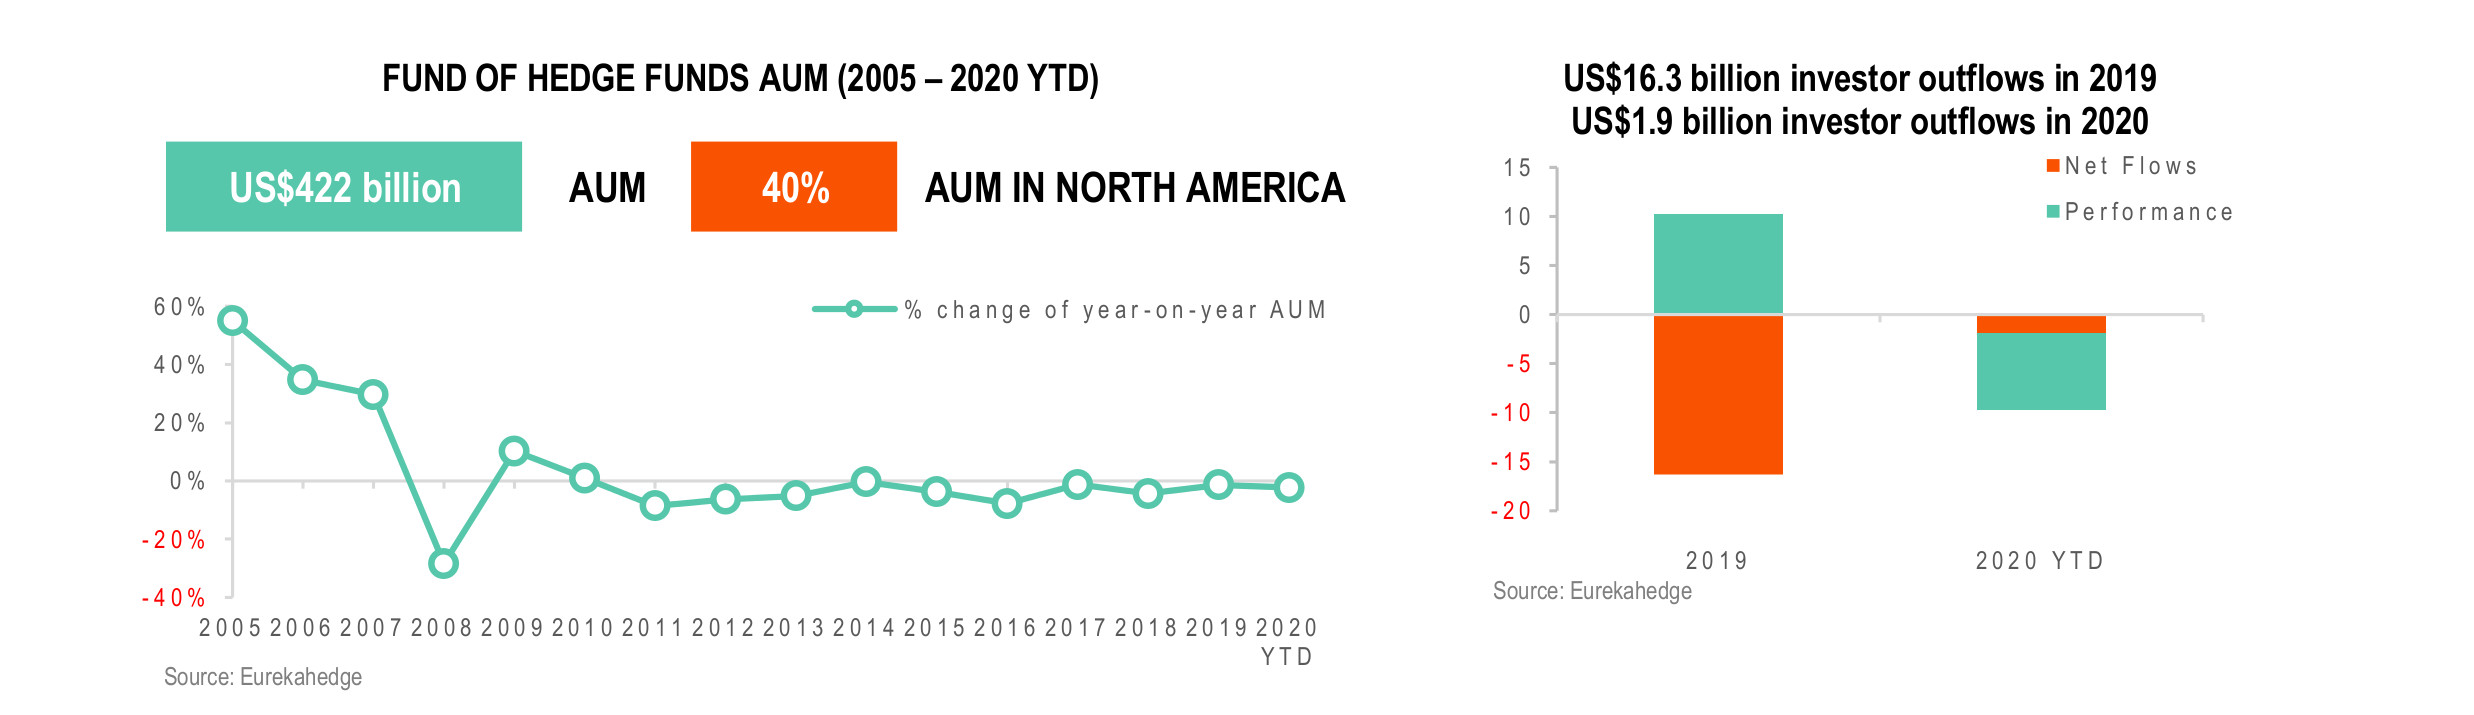 Funds of Hedge Funds Infographic June 2020 - AUM